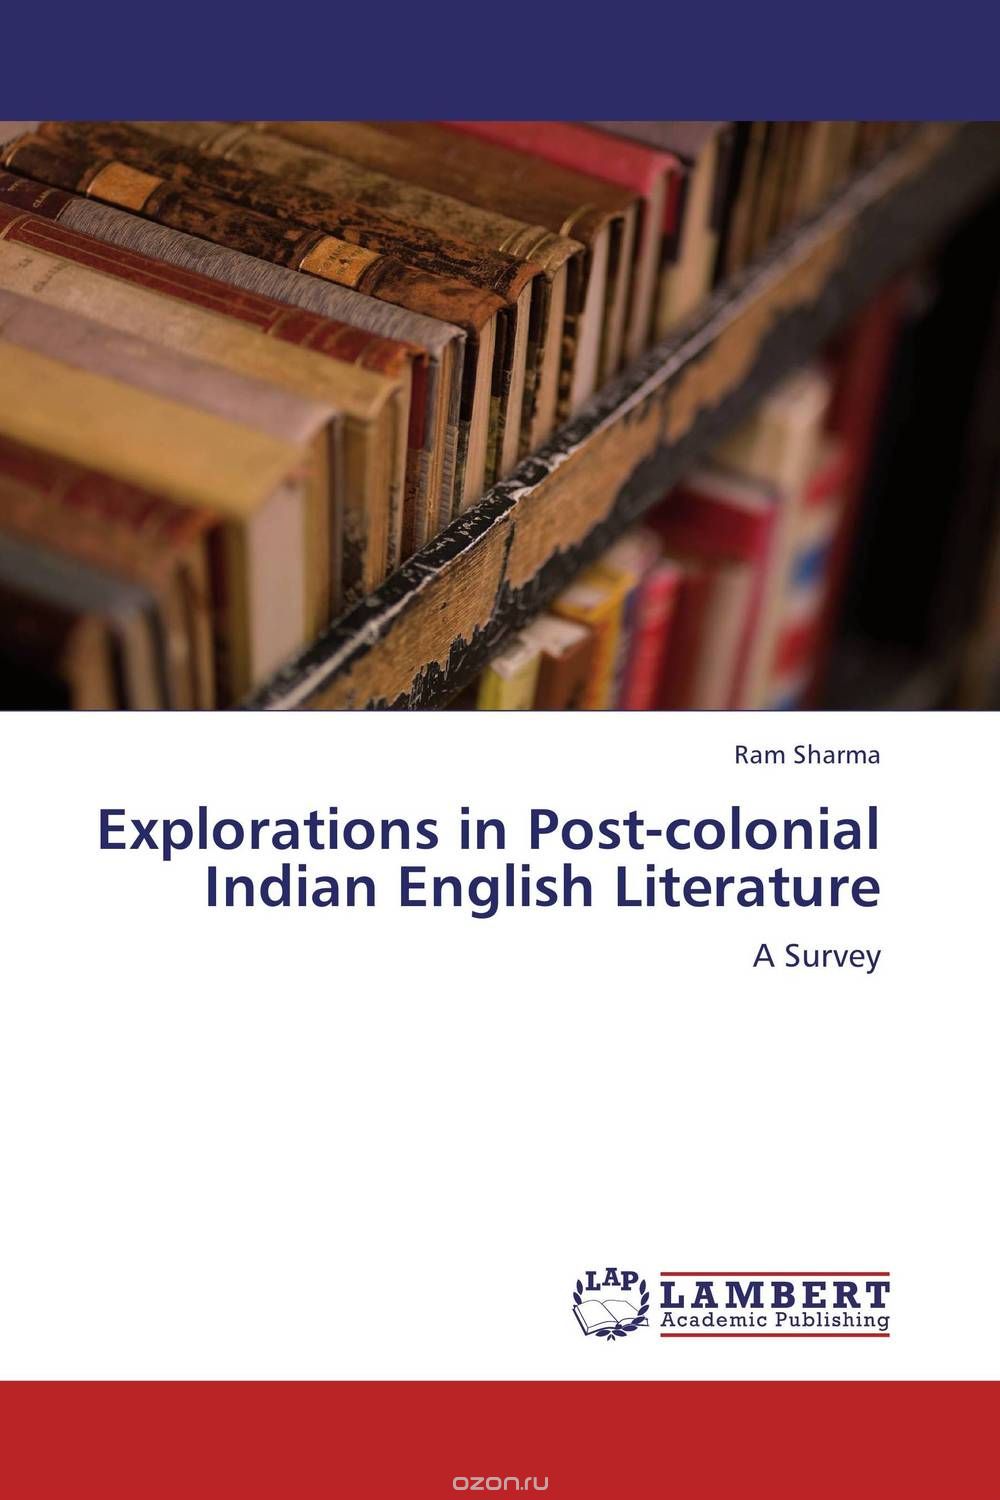 Explorations in Post-colonial Indian English Literature